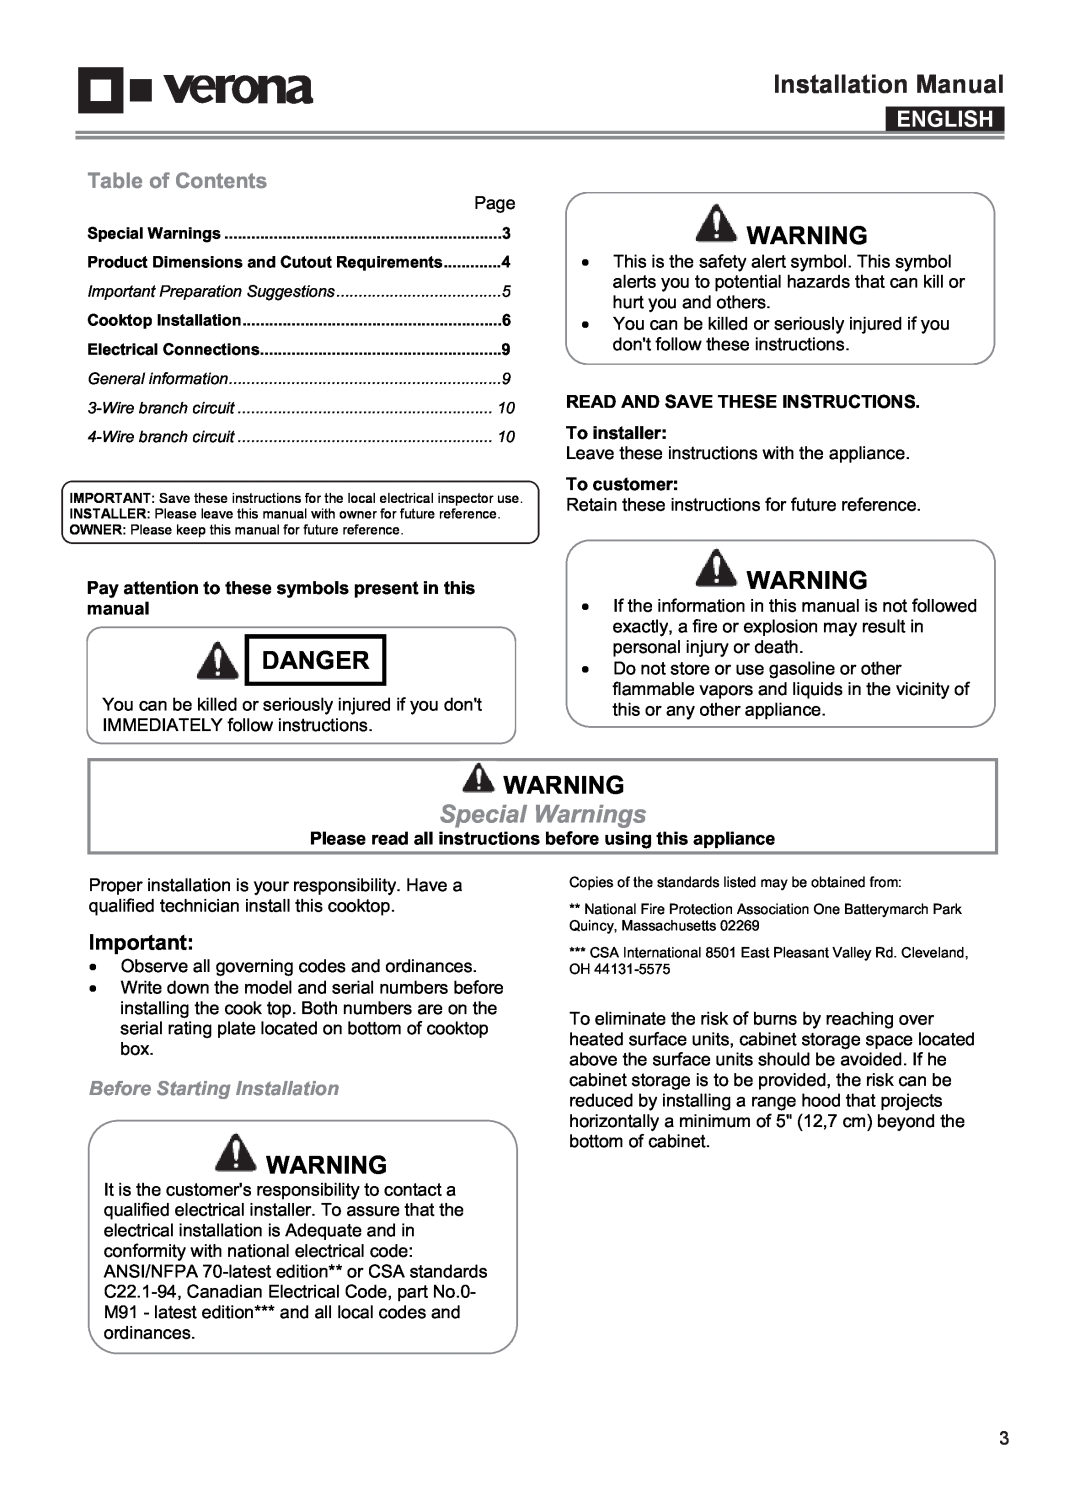 Verona VECTIM365 Installation Manual, Danger, Special Warnings, English, Table of Contents, Before Starting Installation 